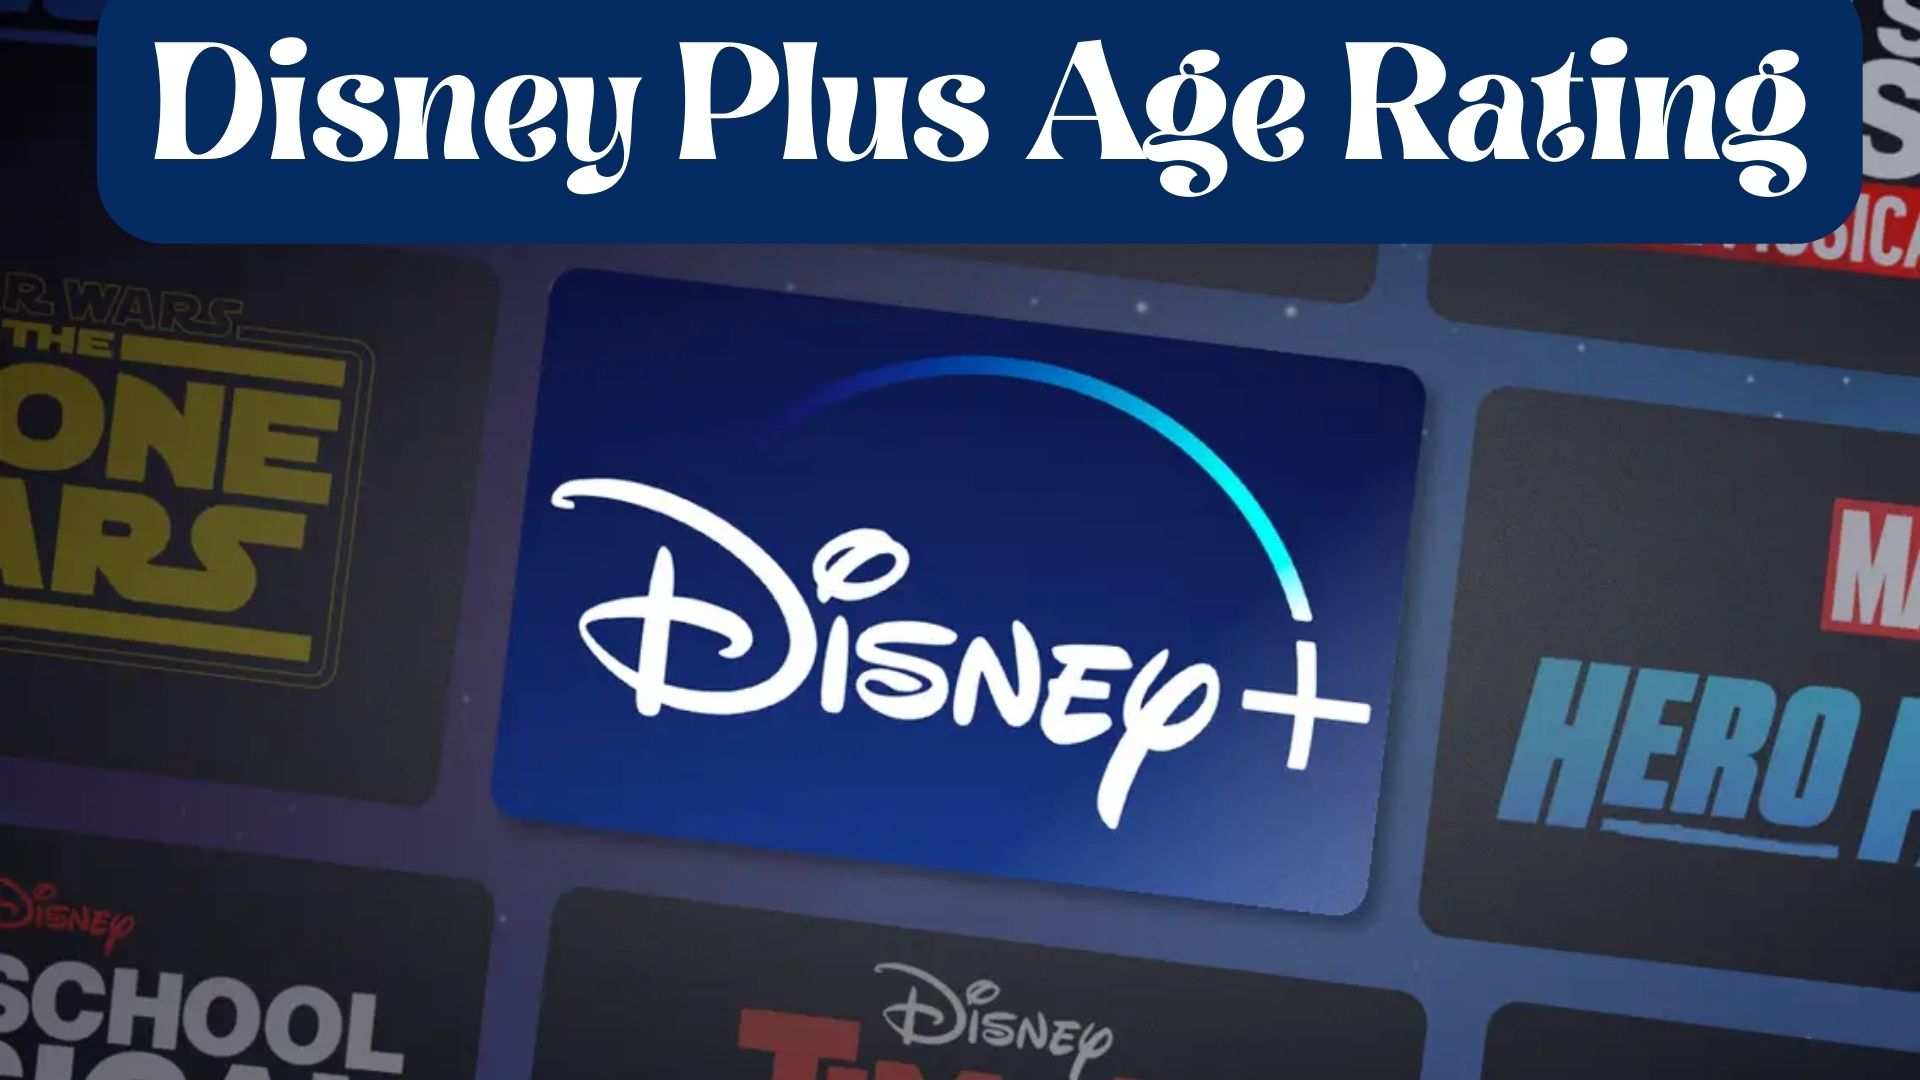 Disney Plus Age Rating wallpaper and images